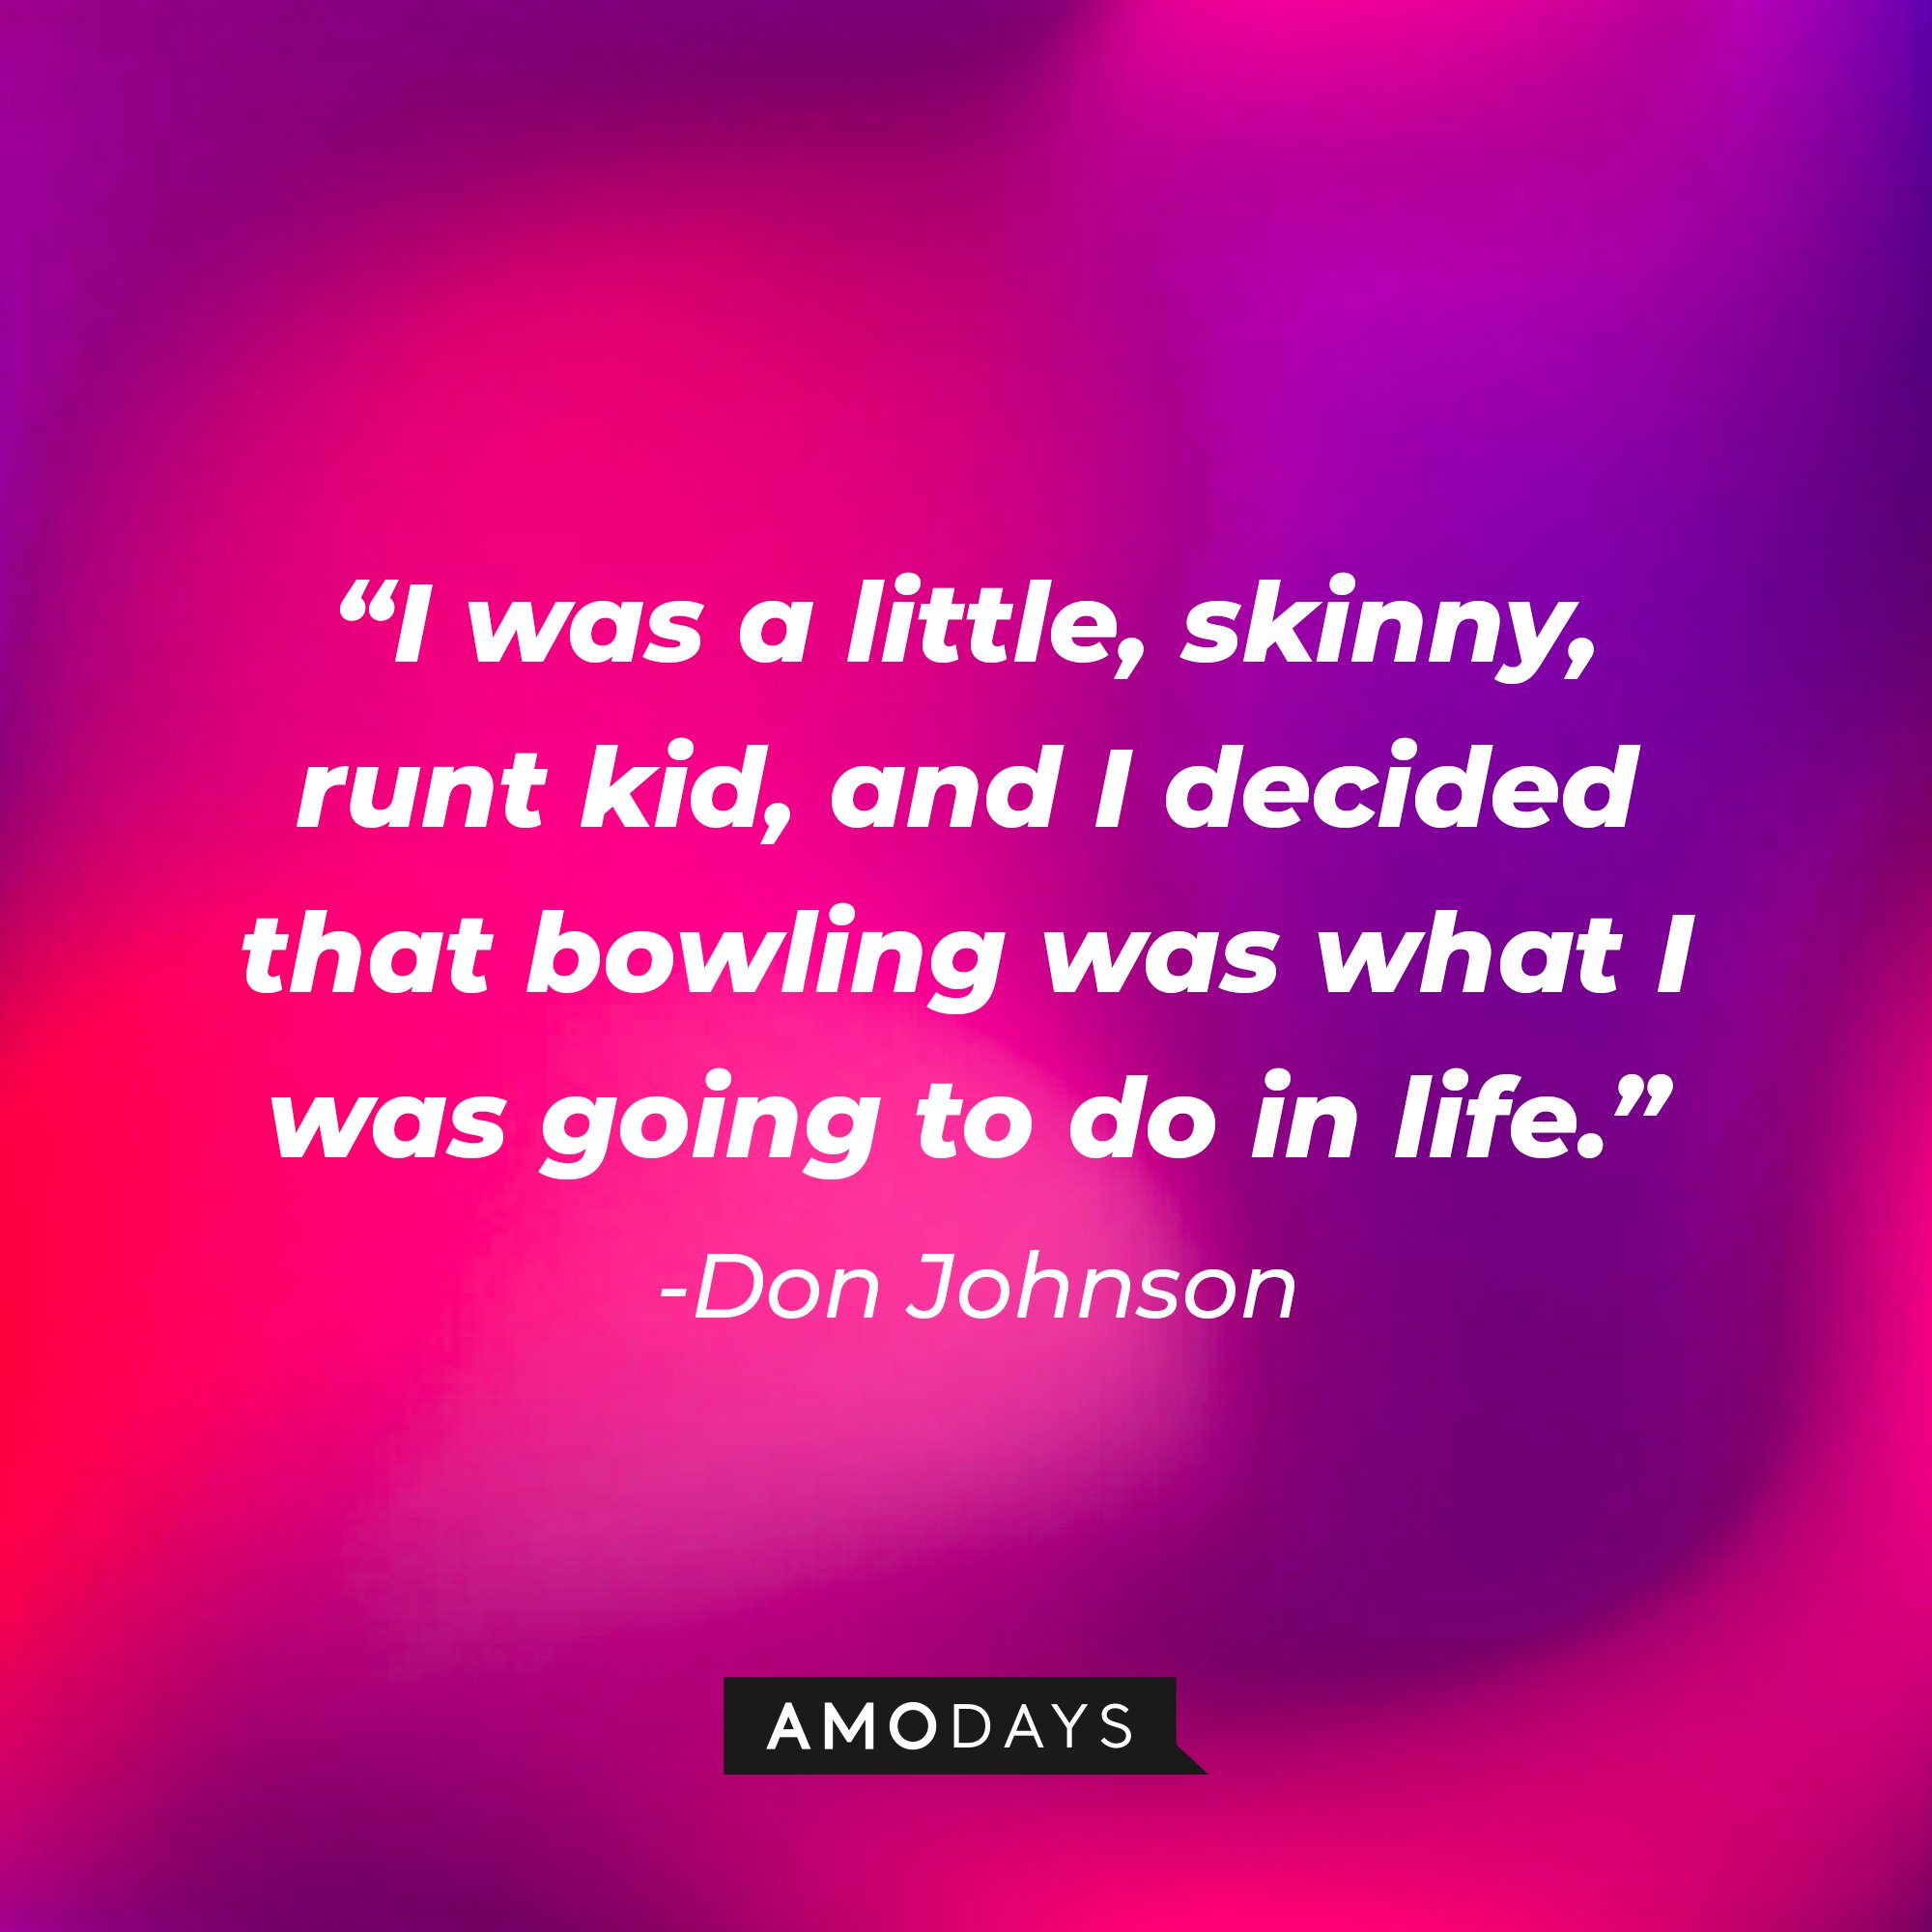 Don Johnson's quote: "I was a little, skinny, runt kid, and I decided that bowling was what I was going to do in life." | Image: AmoDays